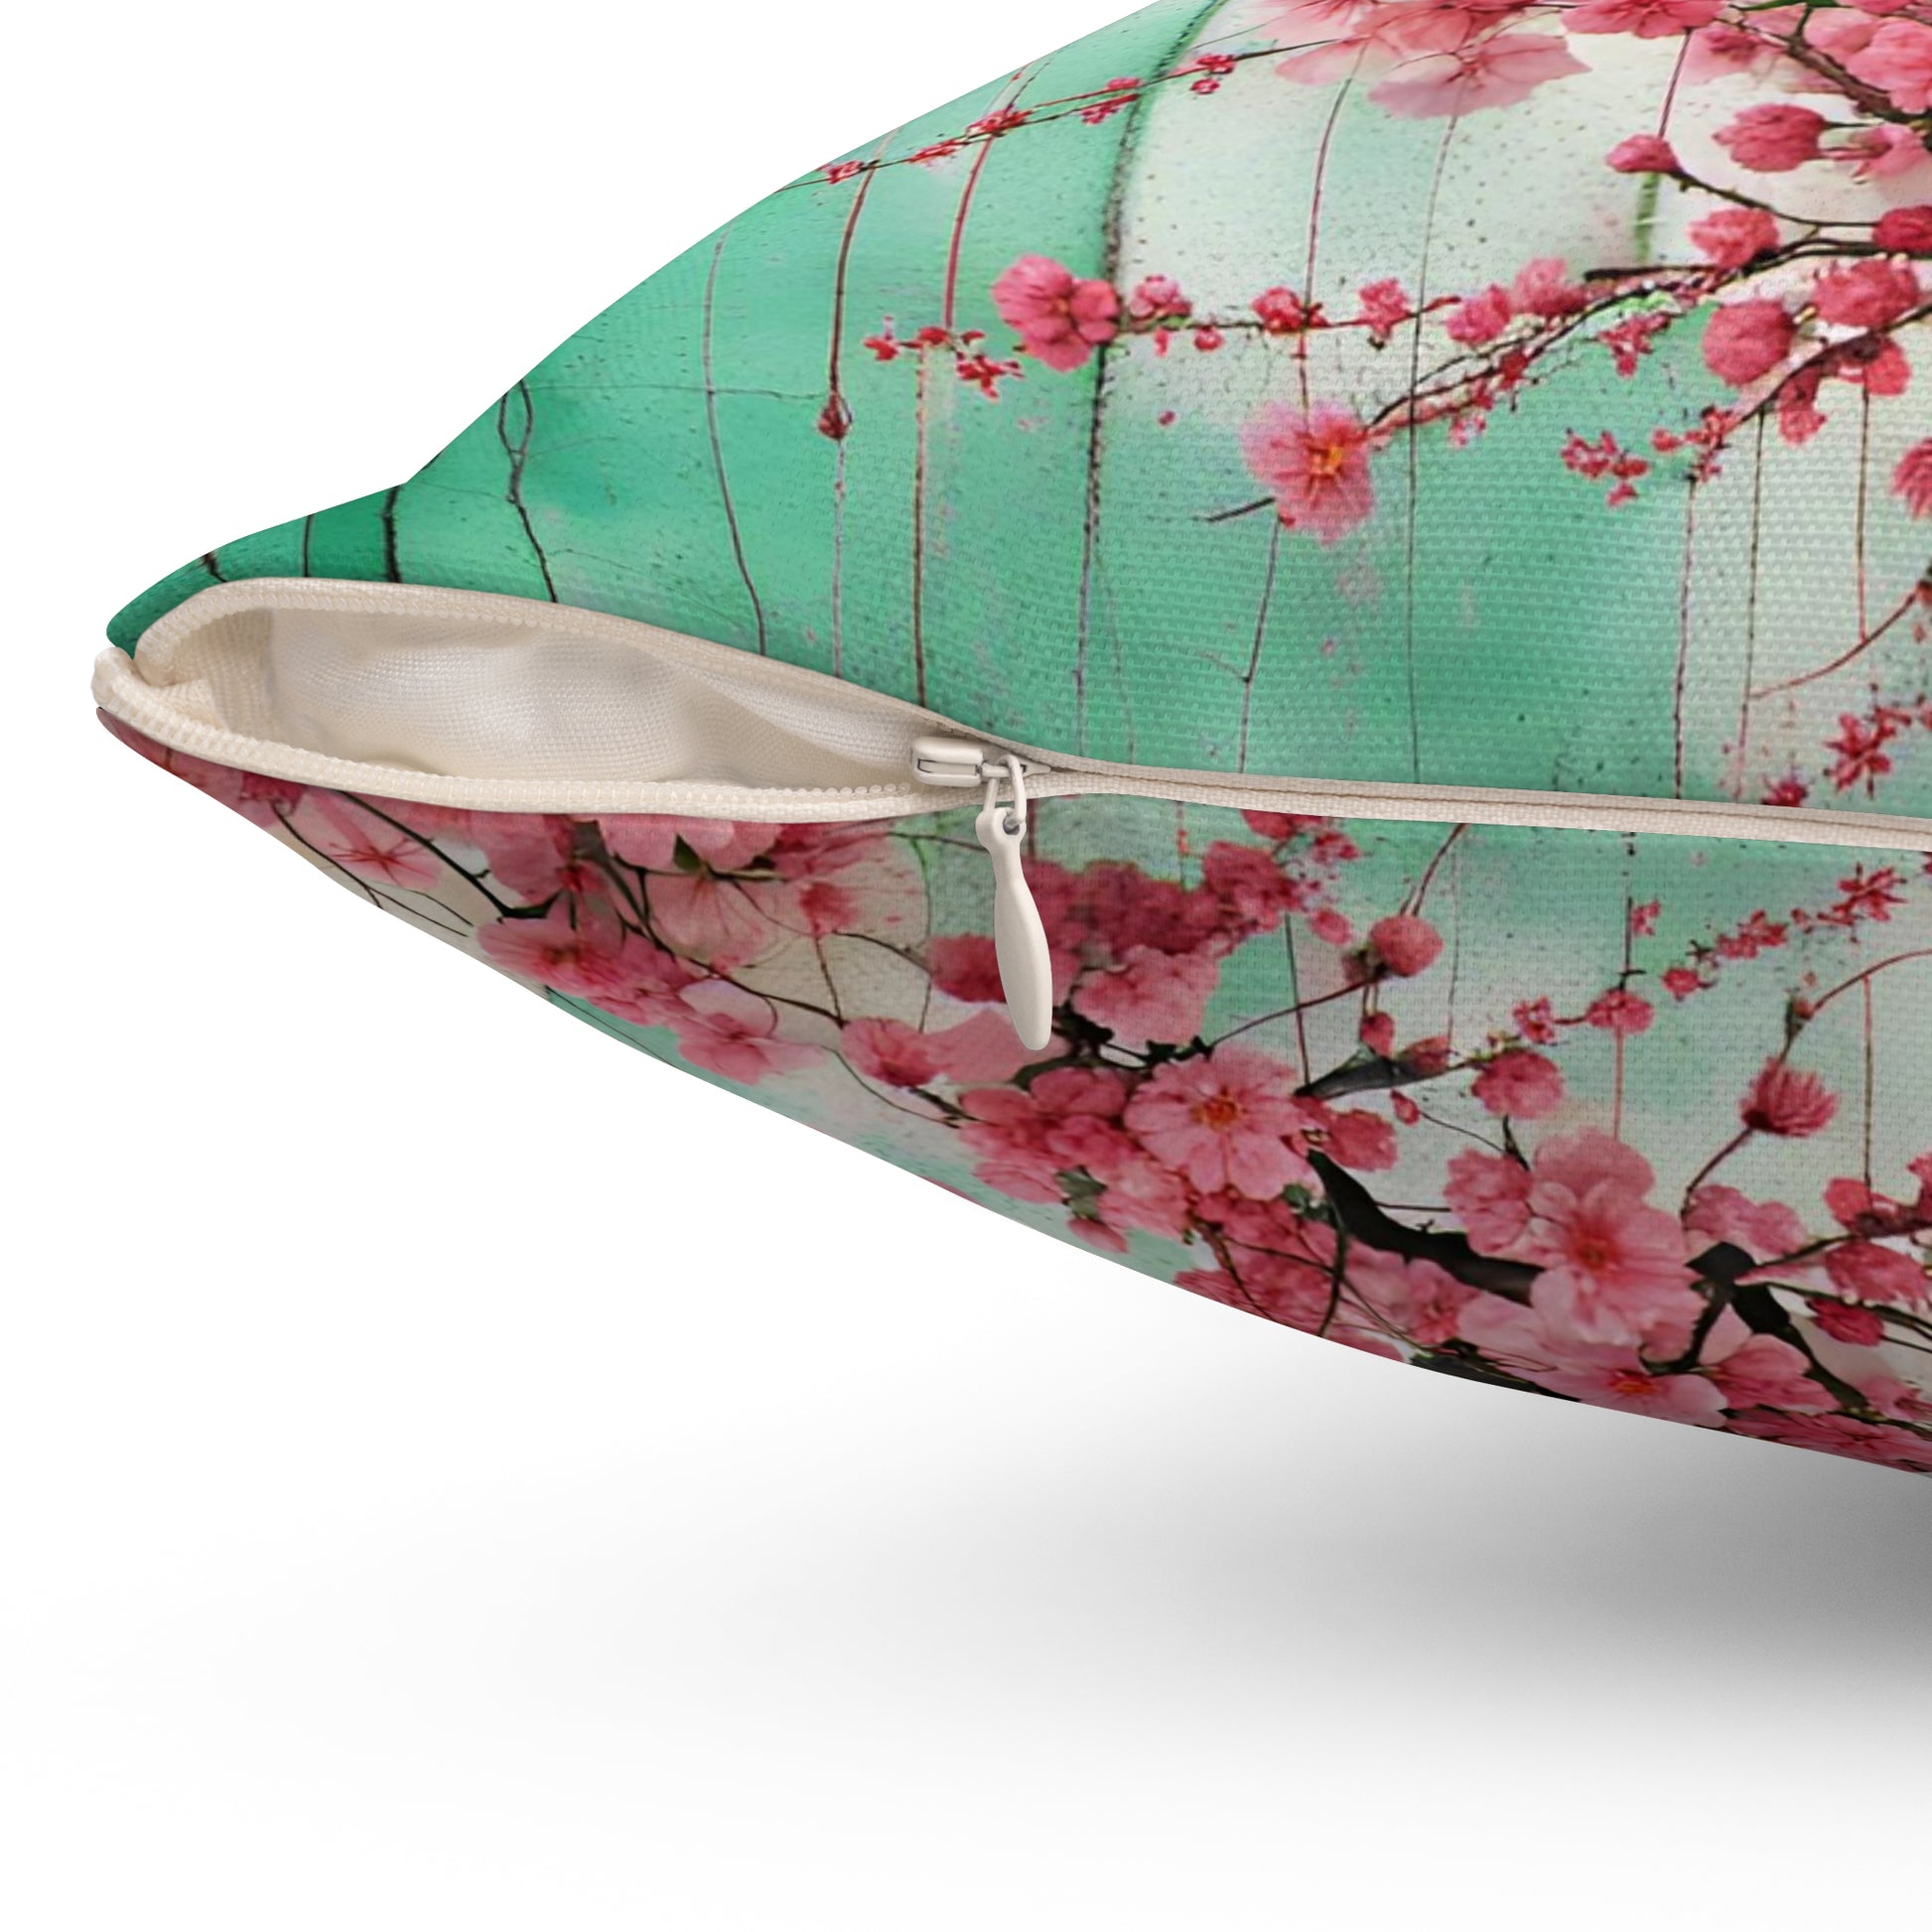 Japanese Themed Outdoor Pillows and Patio Decor Pink Cherry Blossoms Print 16x16 zipper